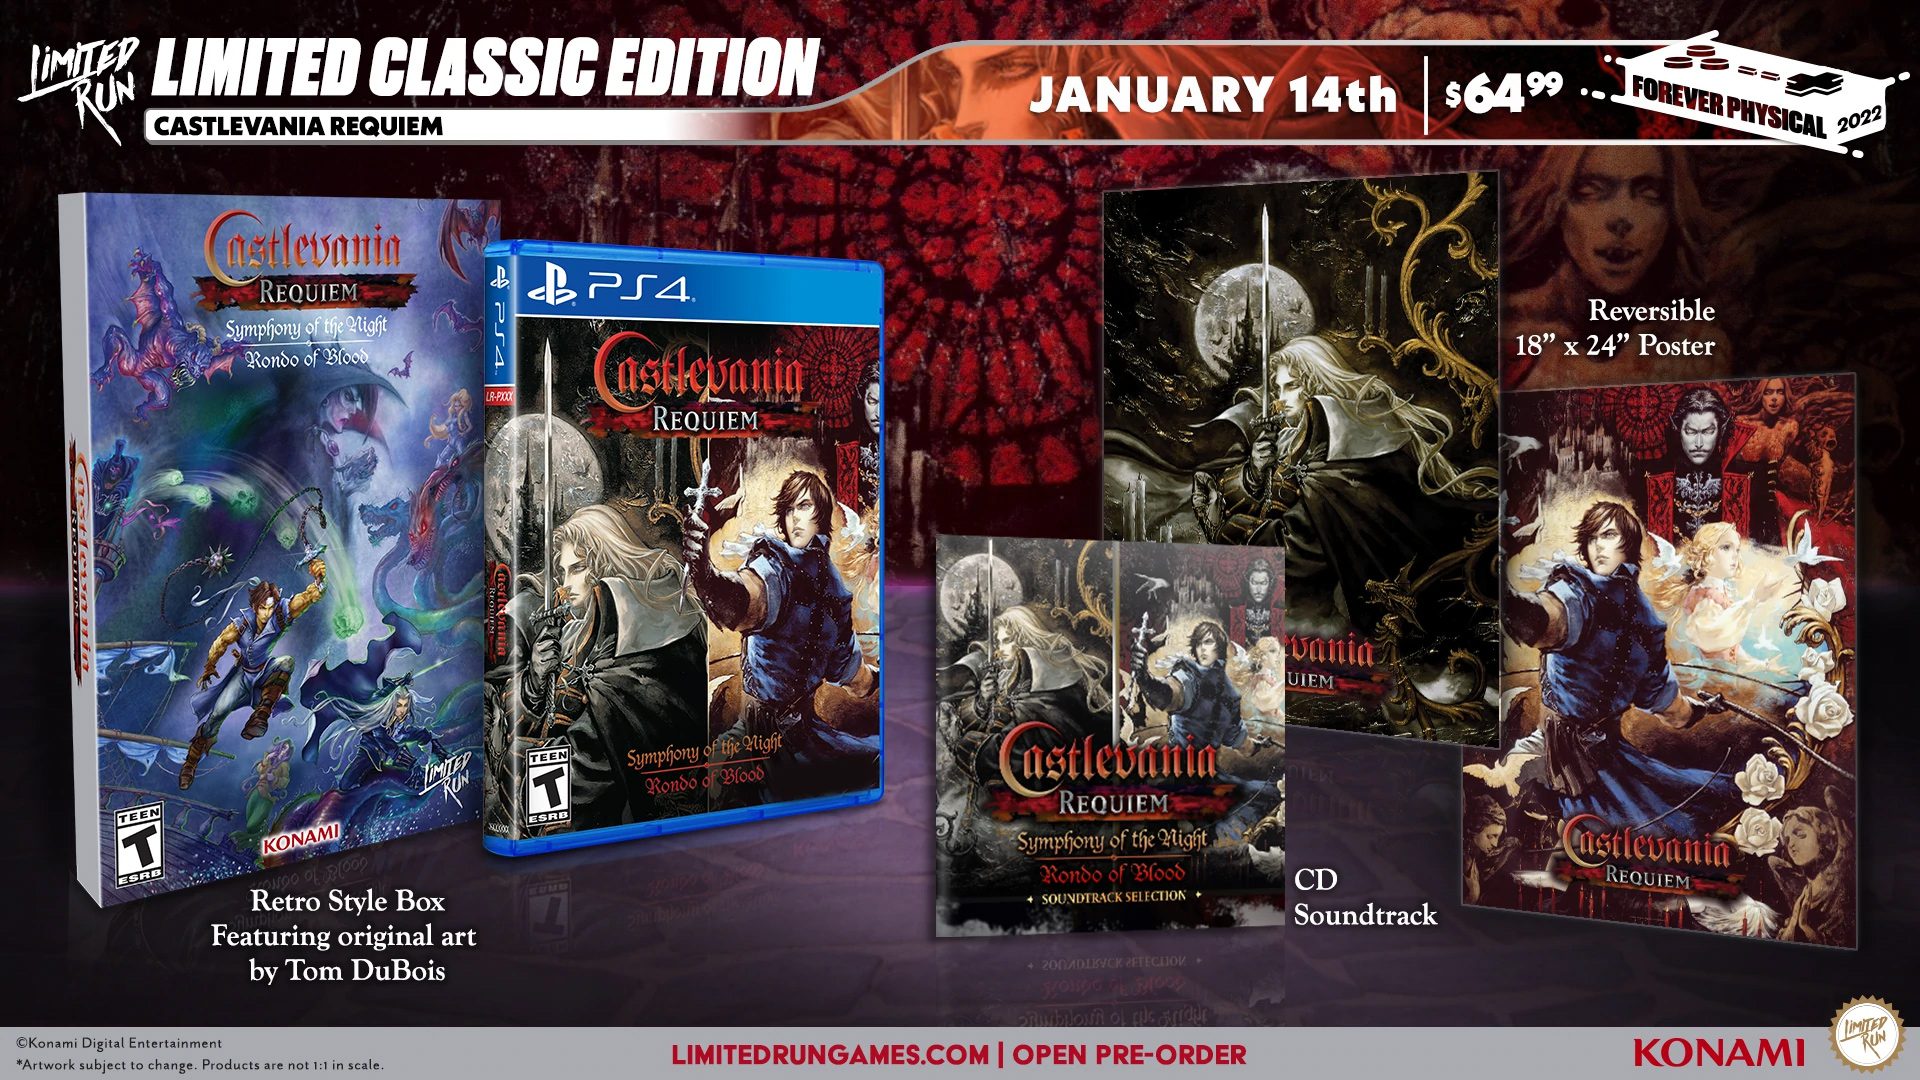 Castlevania Requiem physical edition pre-orders are open at 